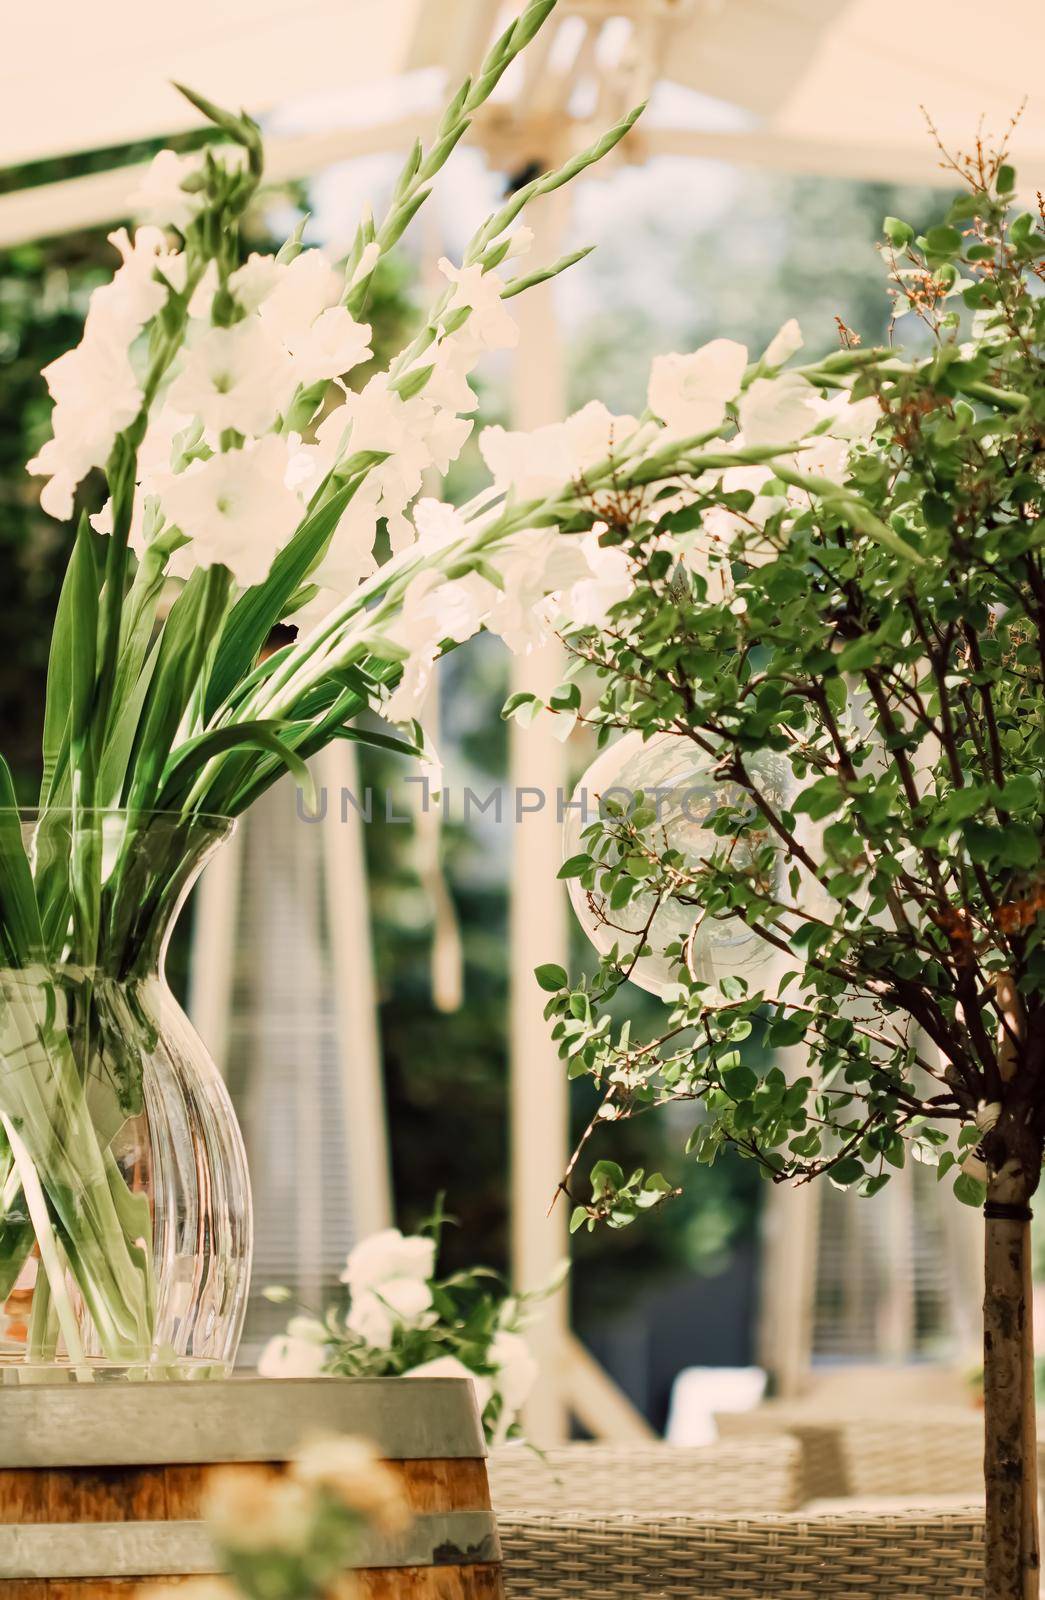 Floral wedding decoration in a restaurant outdoors in summer.